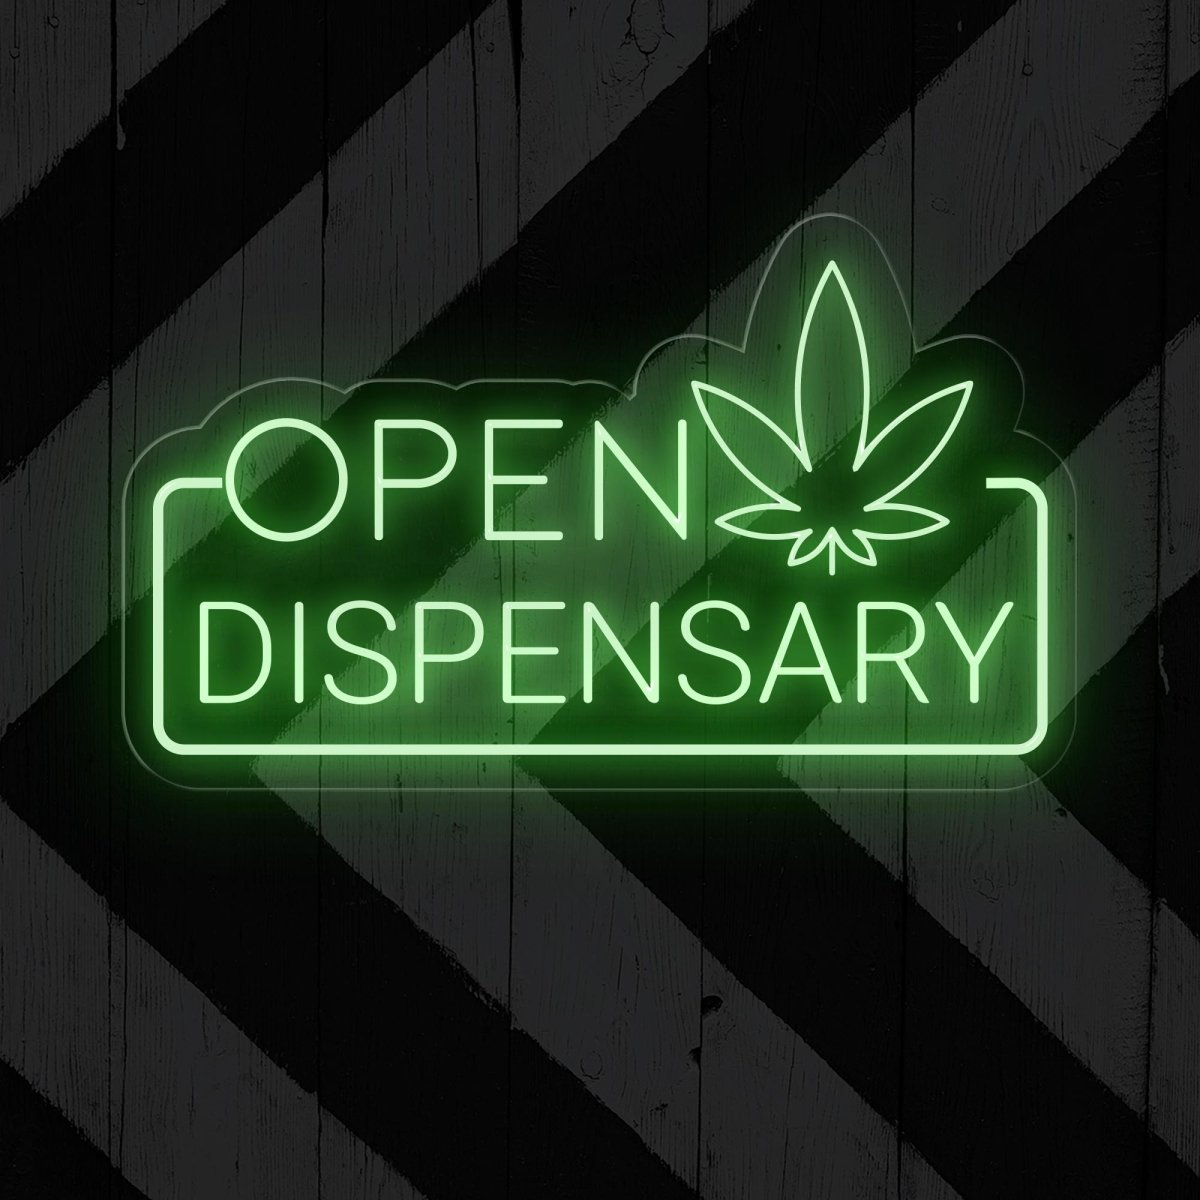 Dispensary Open Neon Sign: Illuminate Your Space with Vibrancy - NEONXPERT